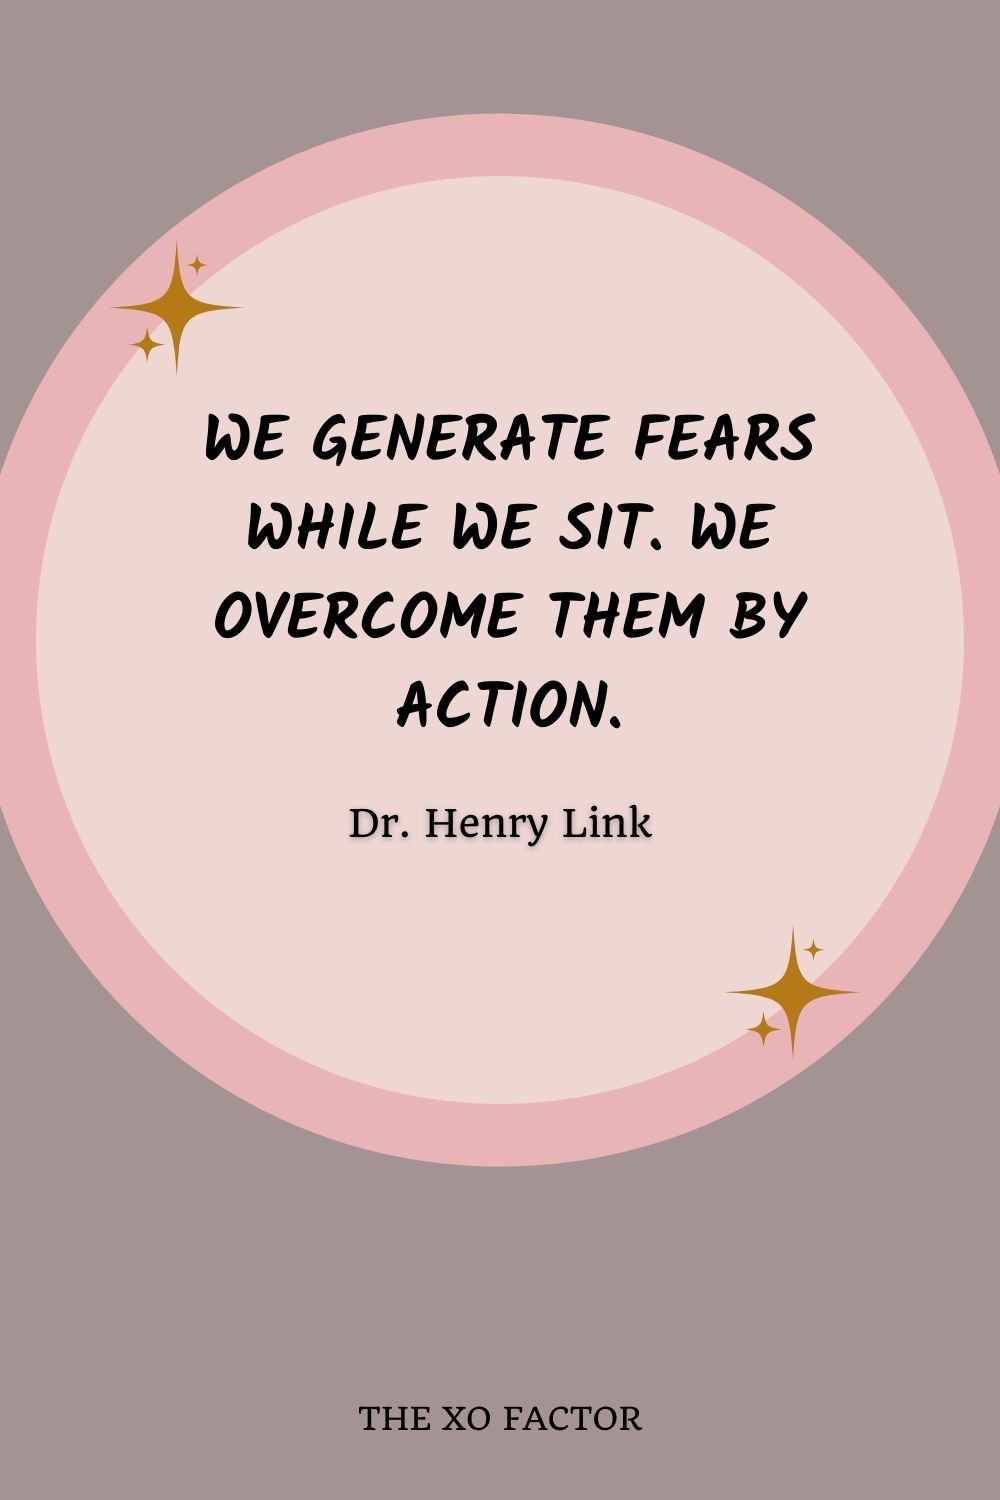 We generate fears while we sit. We overcome them by action.” –  Dr. Henry Link